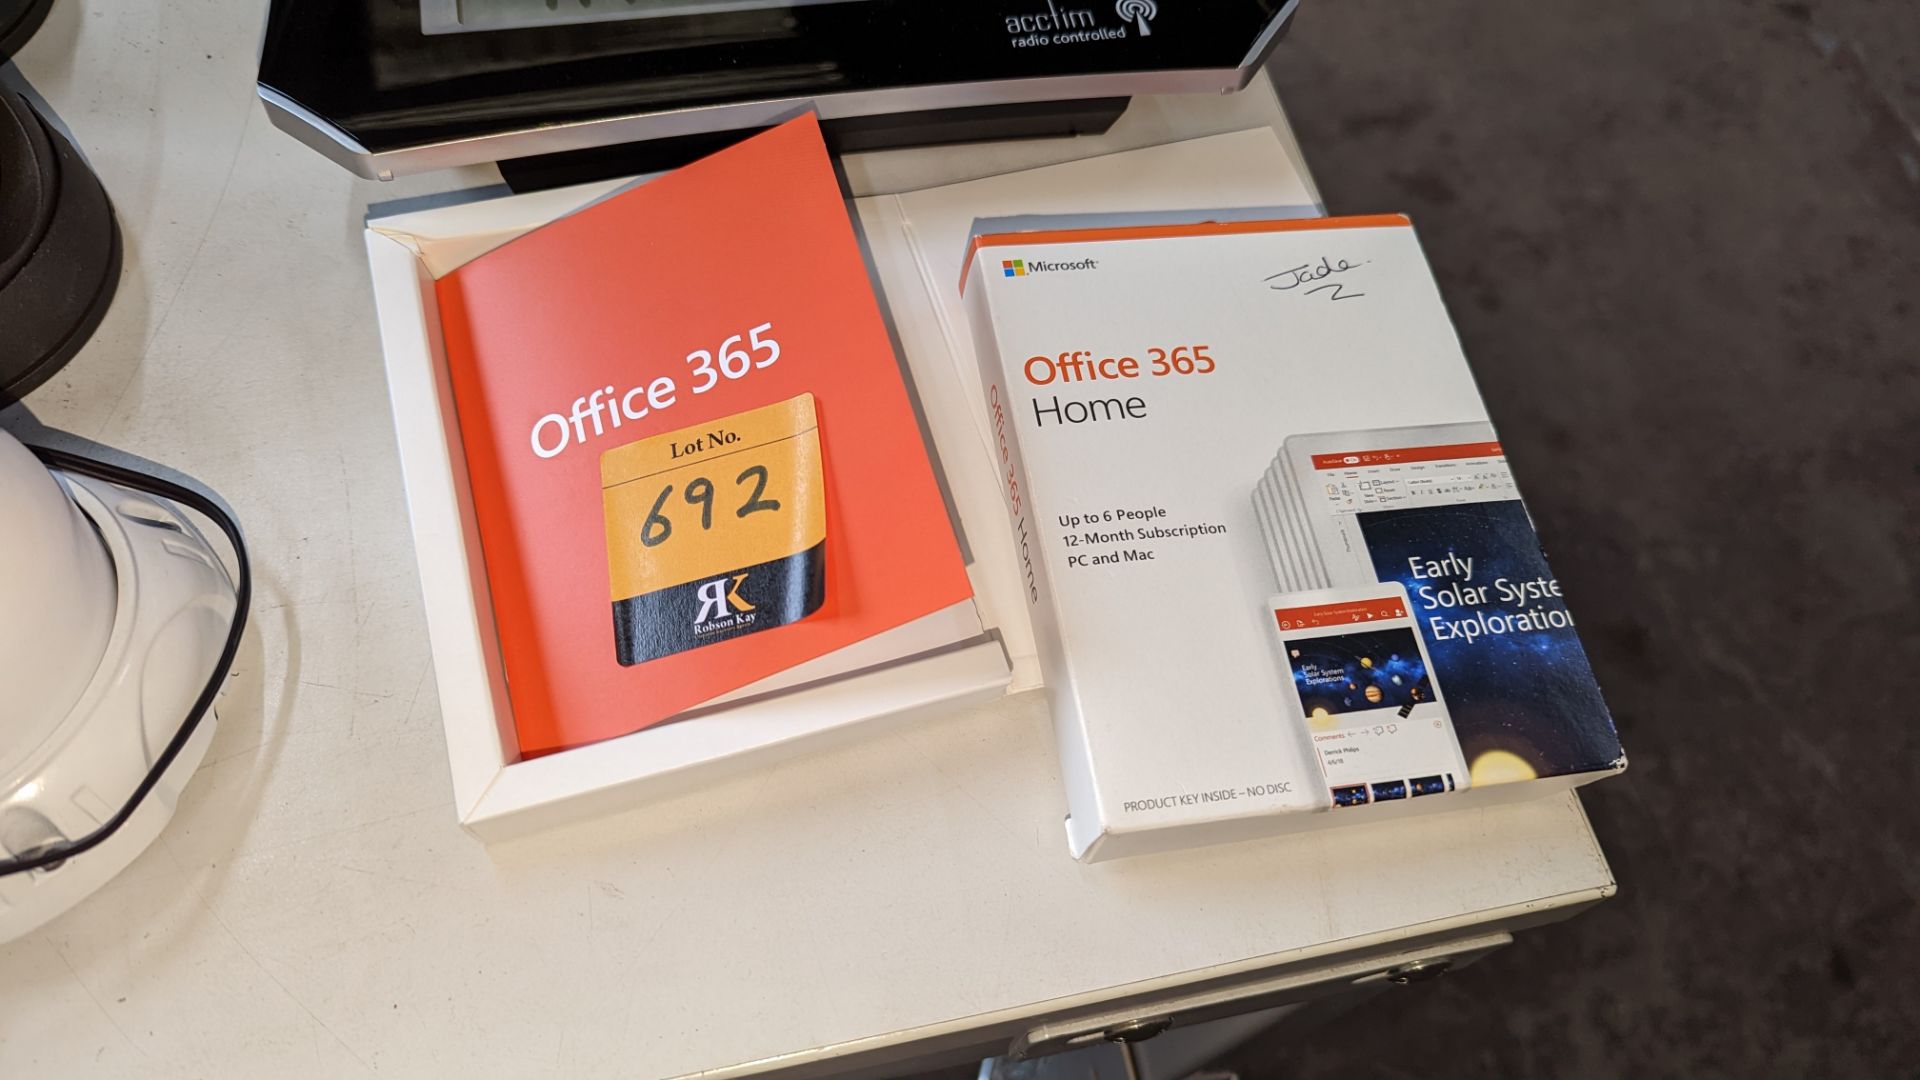 Microsoft Office 365 software pack